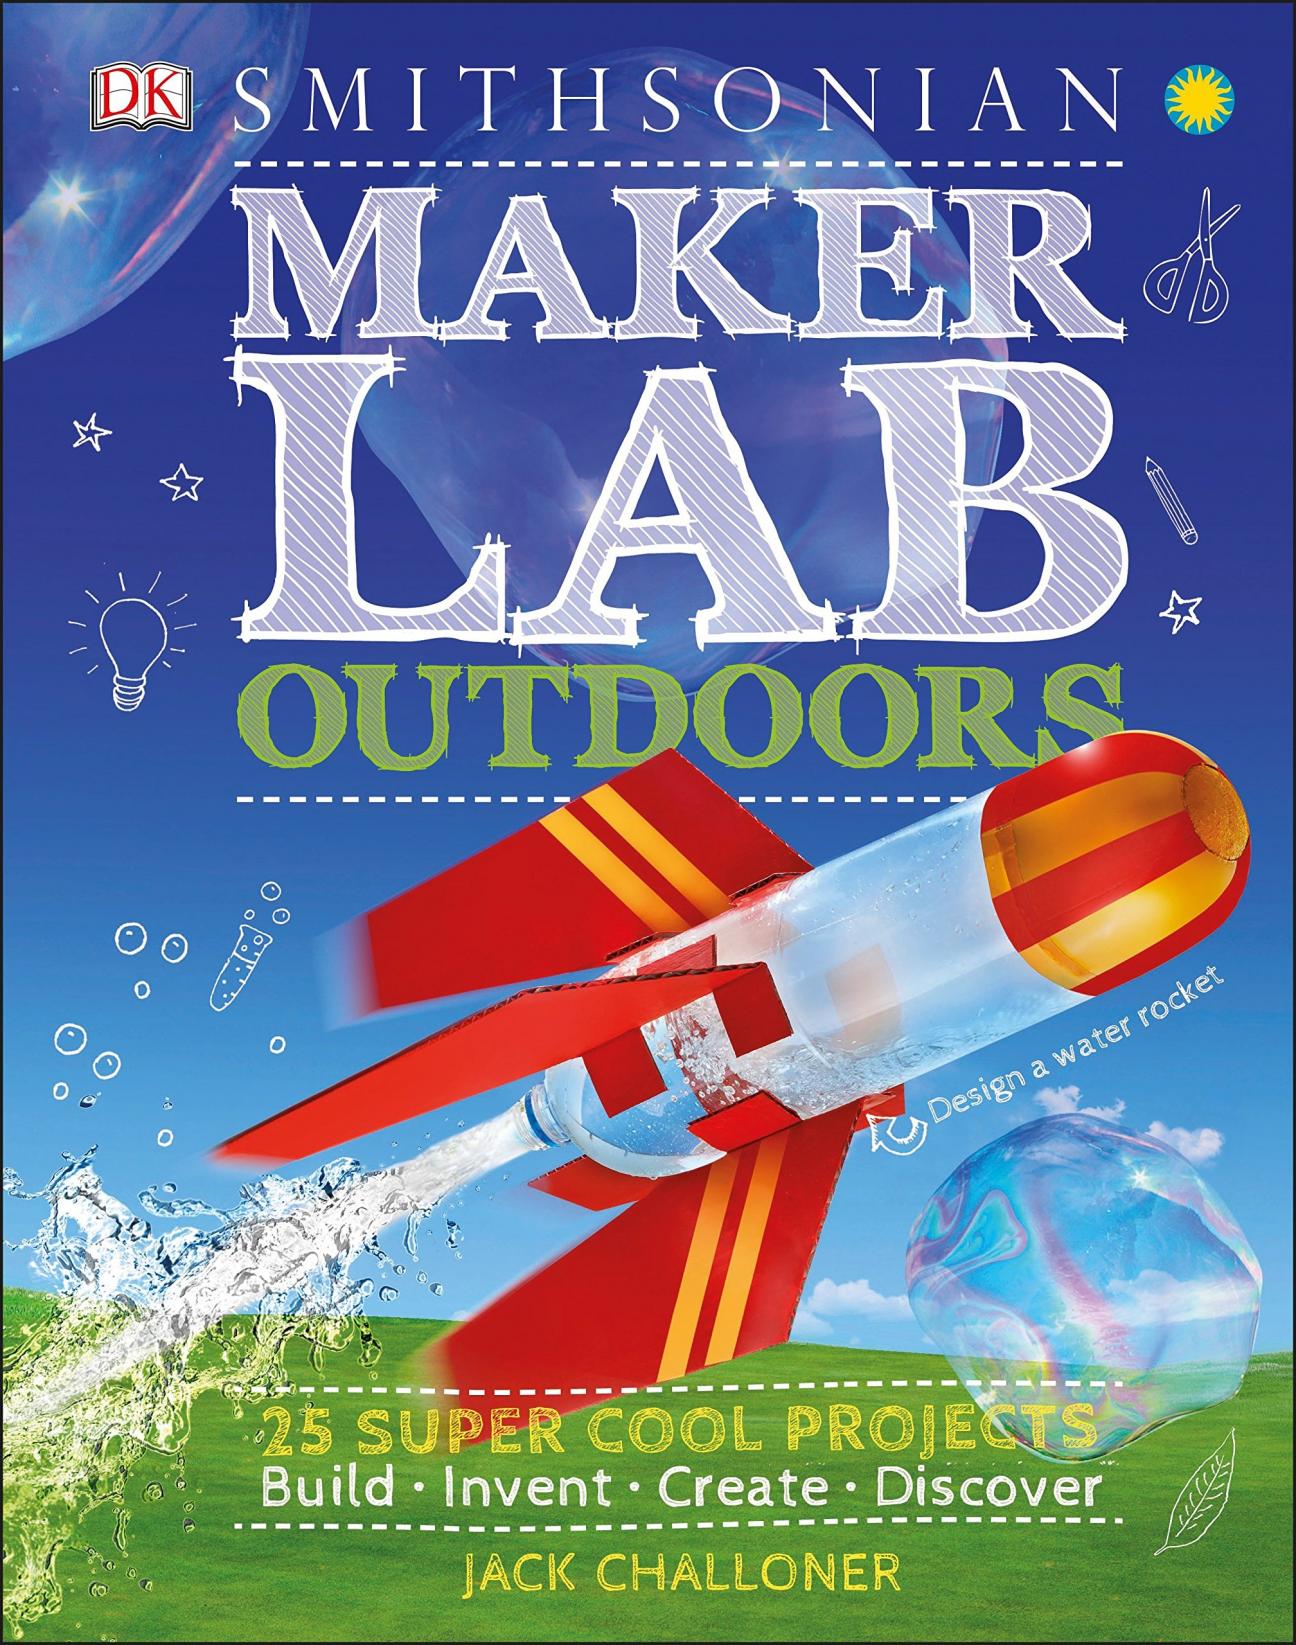 The cover of "Maker Lab Outdoors" by Jack Challoner, which features whimsical drawings and a homemade water bottle rocket.